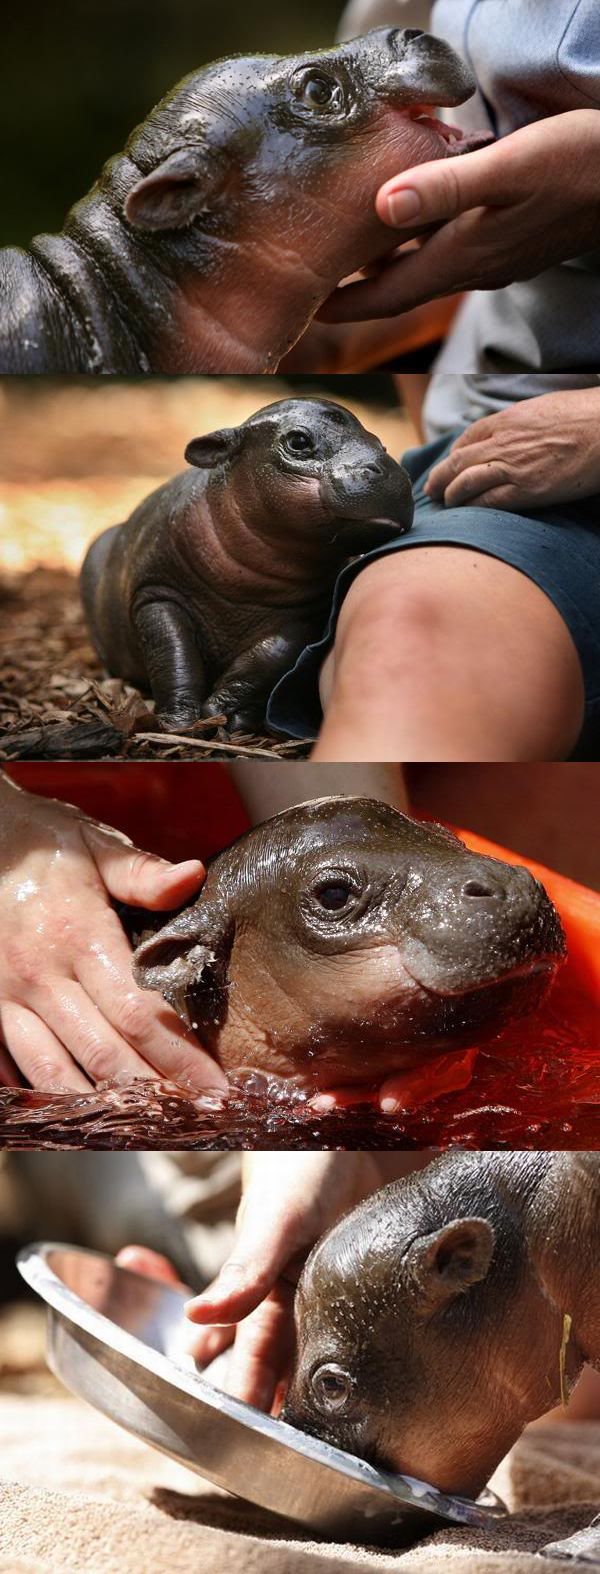 Baby hippo by Kate Geraghty.